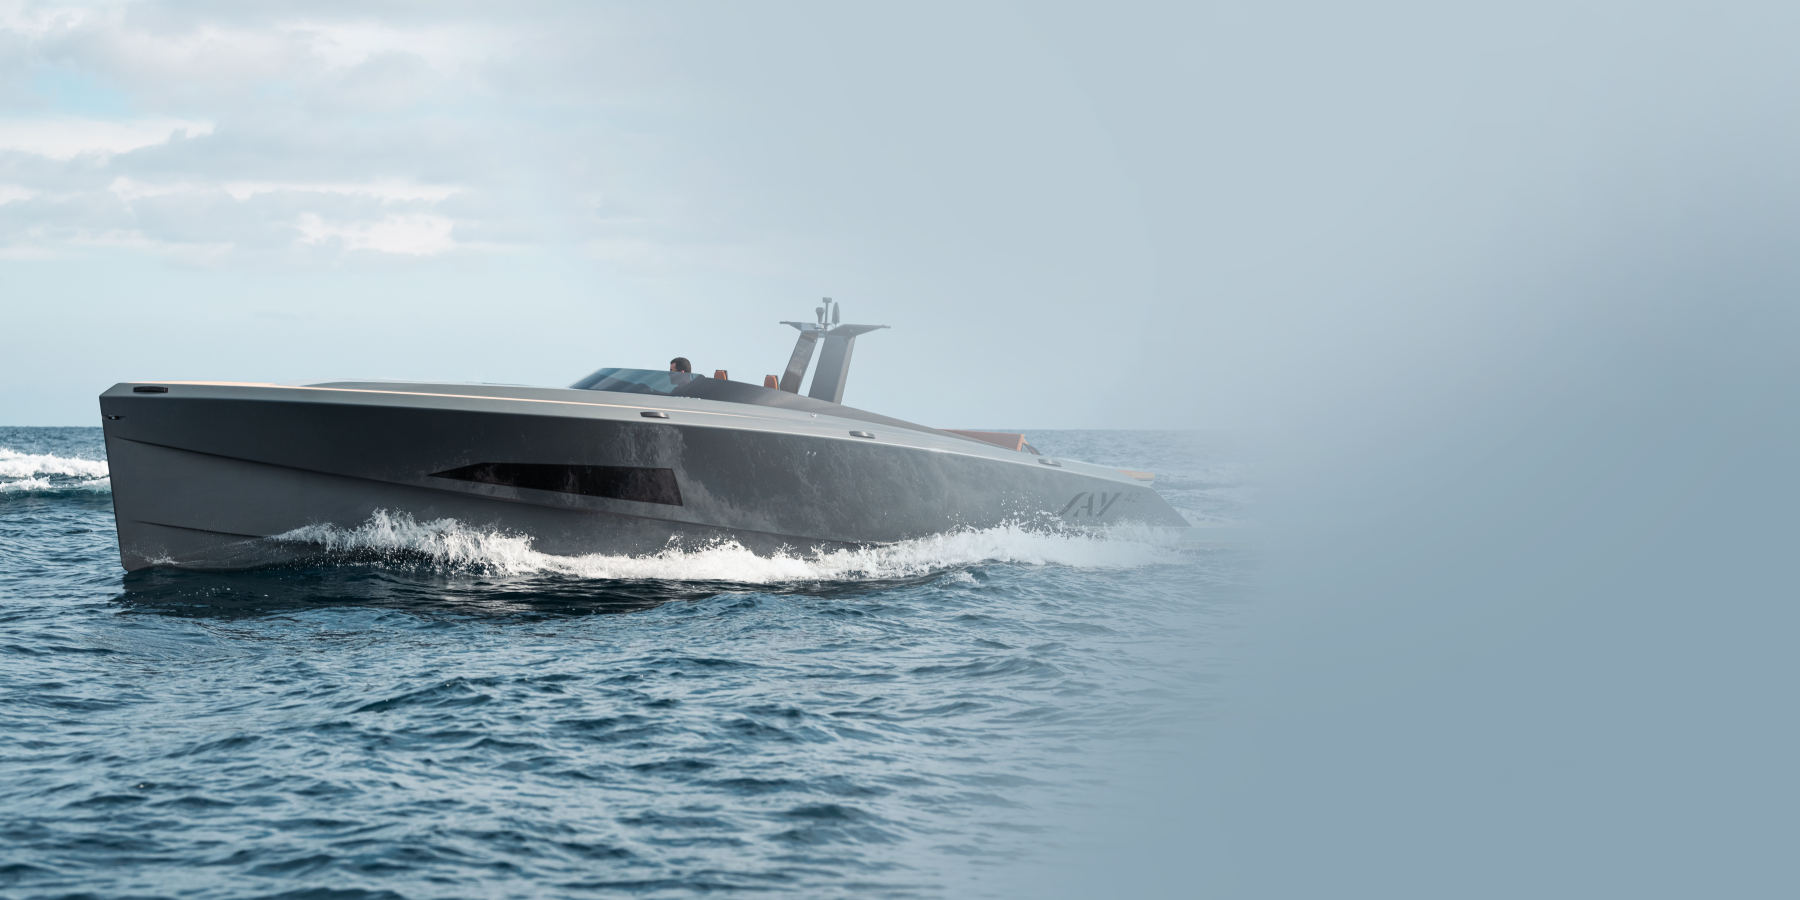 say carbon yachts price